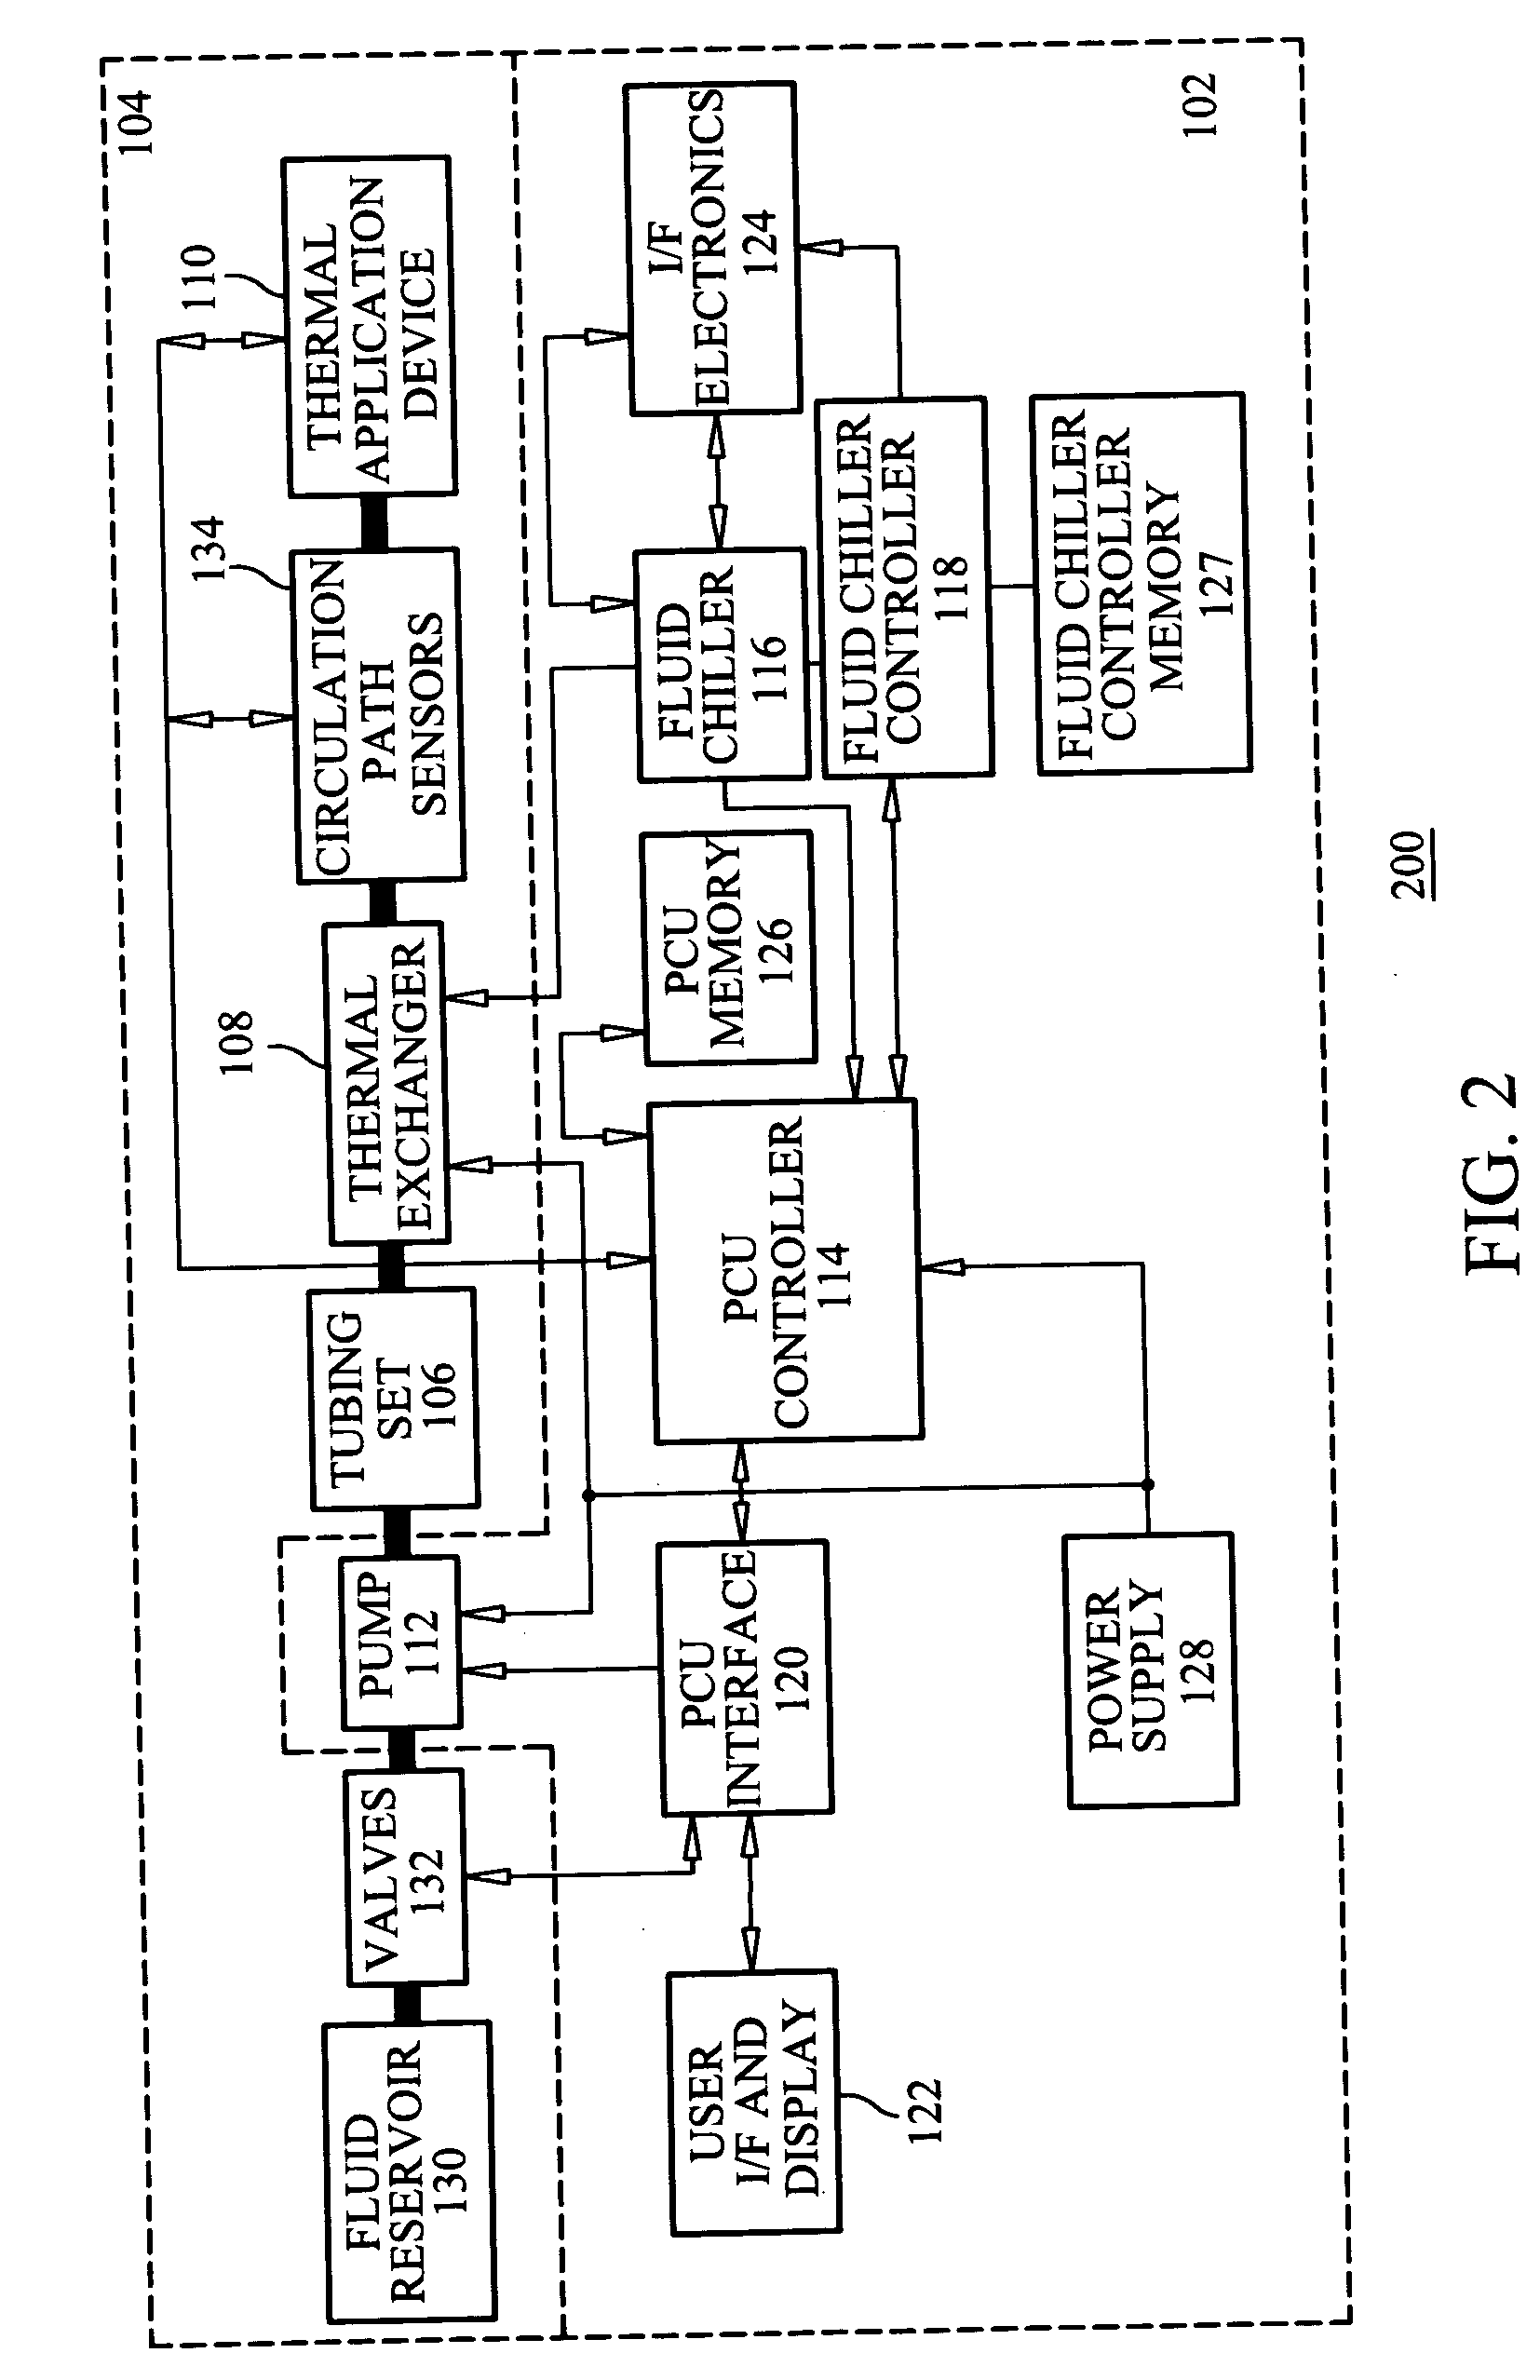 System and method for cooling internal tissue